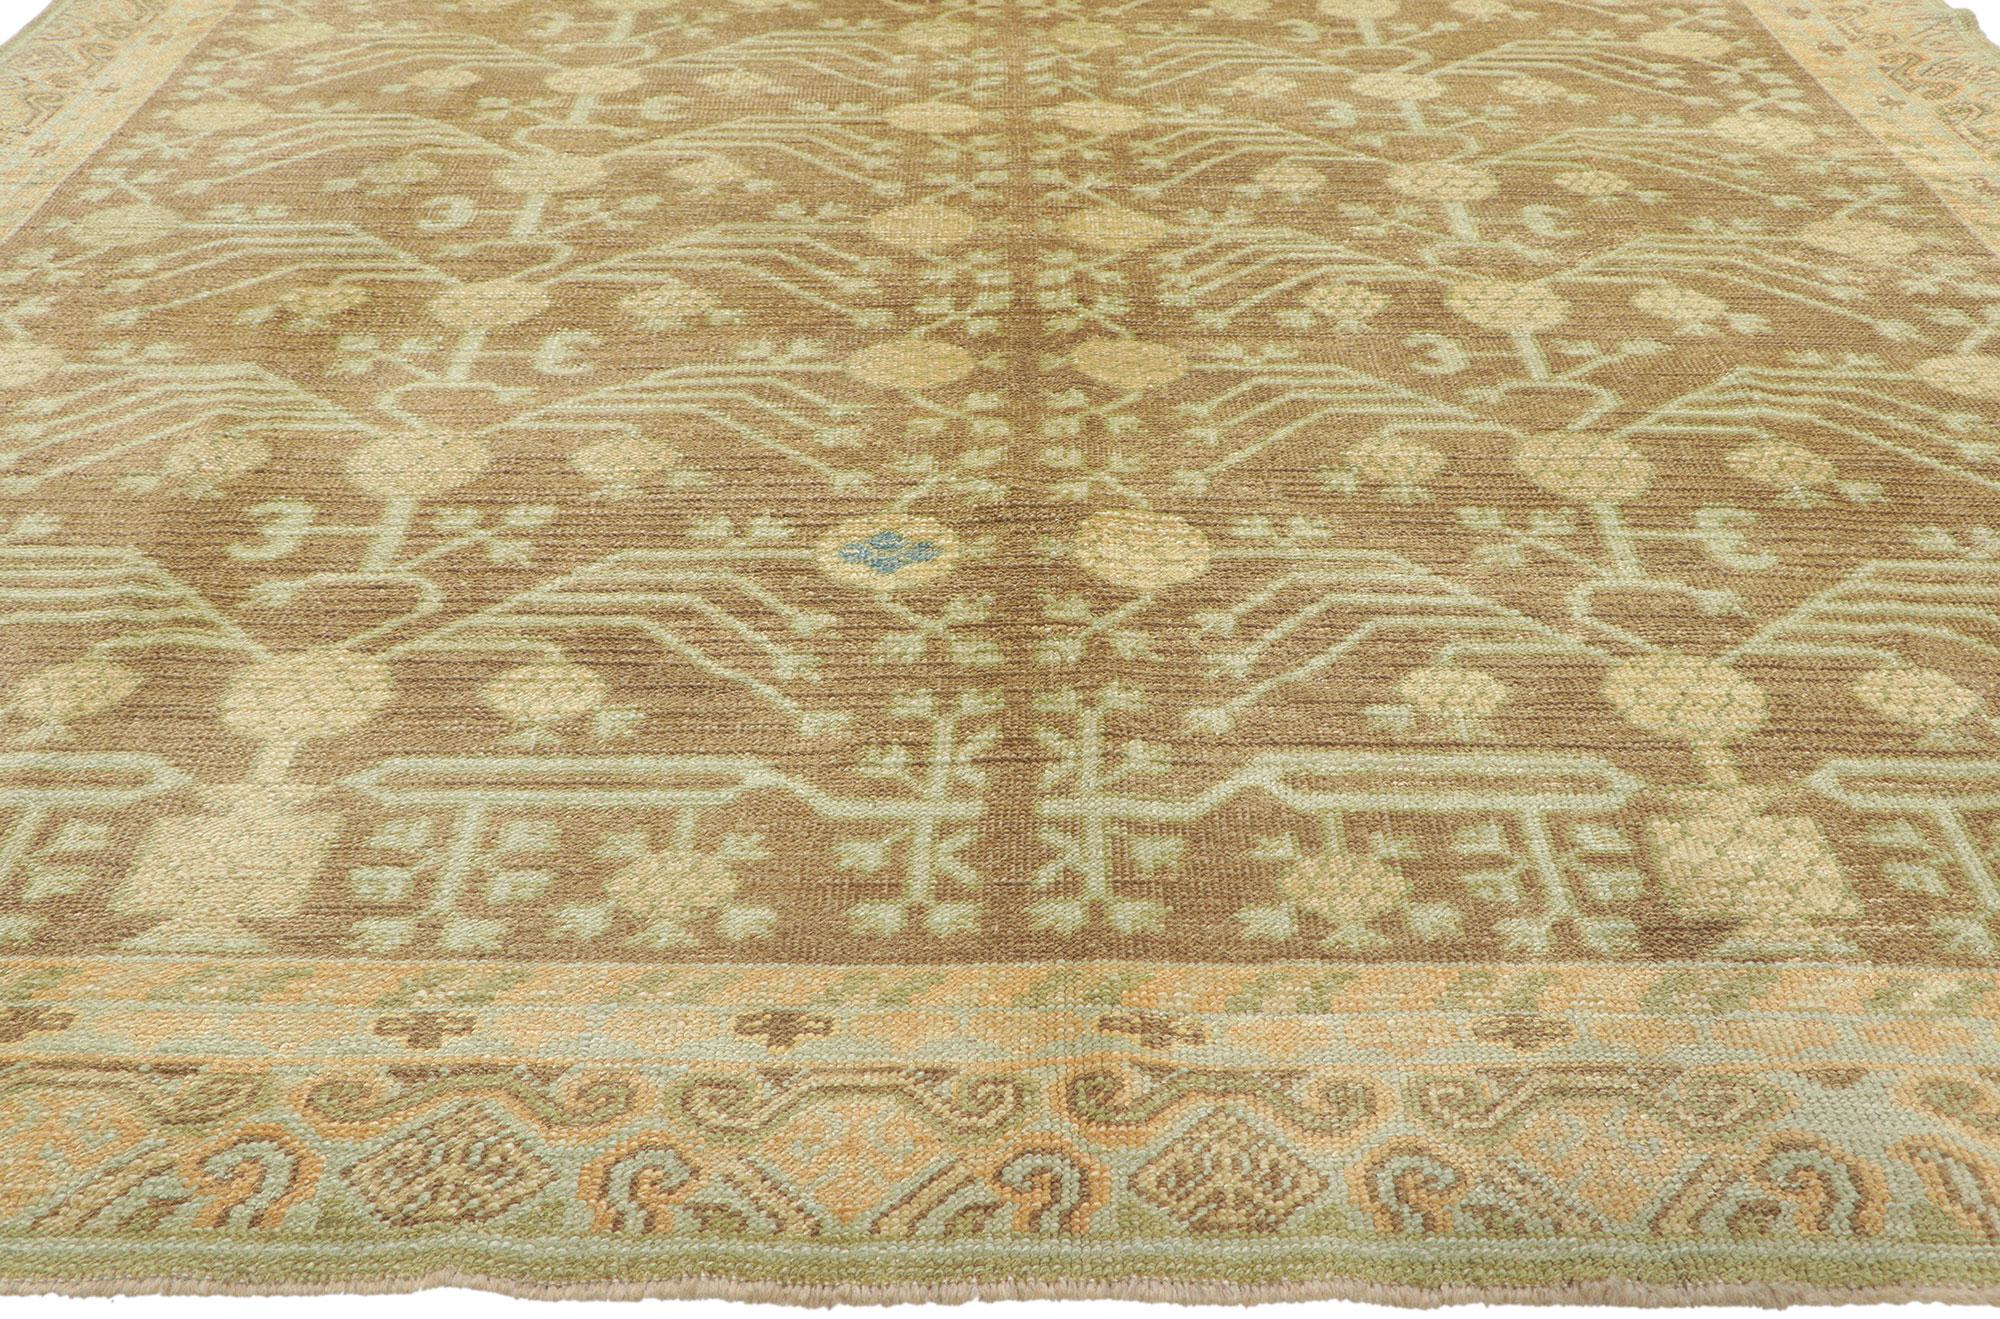 New Turkish Khotan Rug with Earth-Tone Colors In New Condition For Sale In Dallas, TX